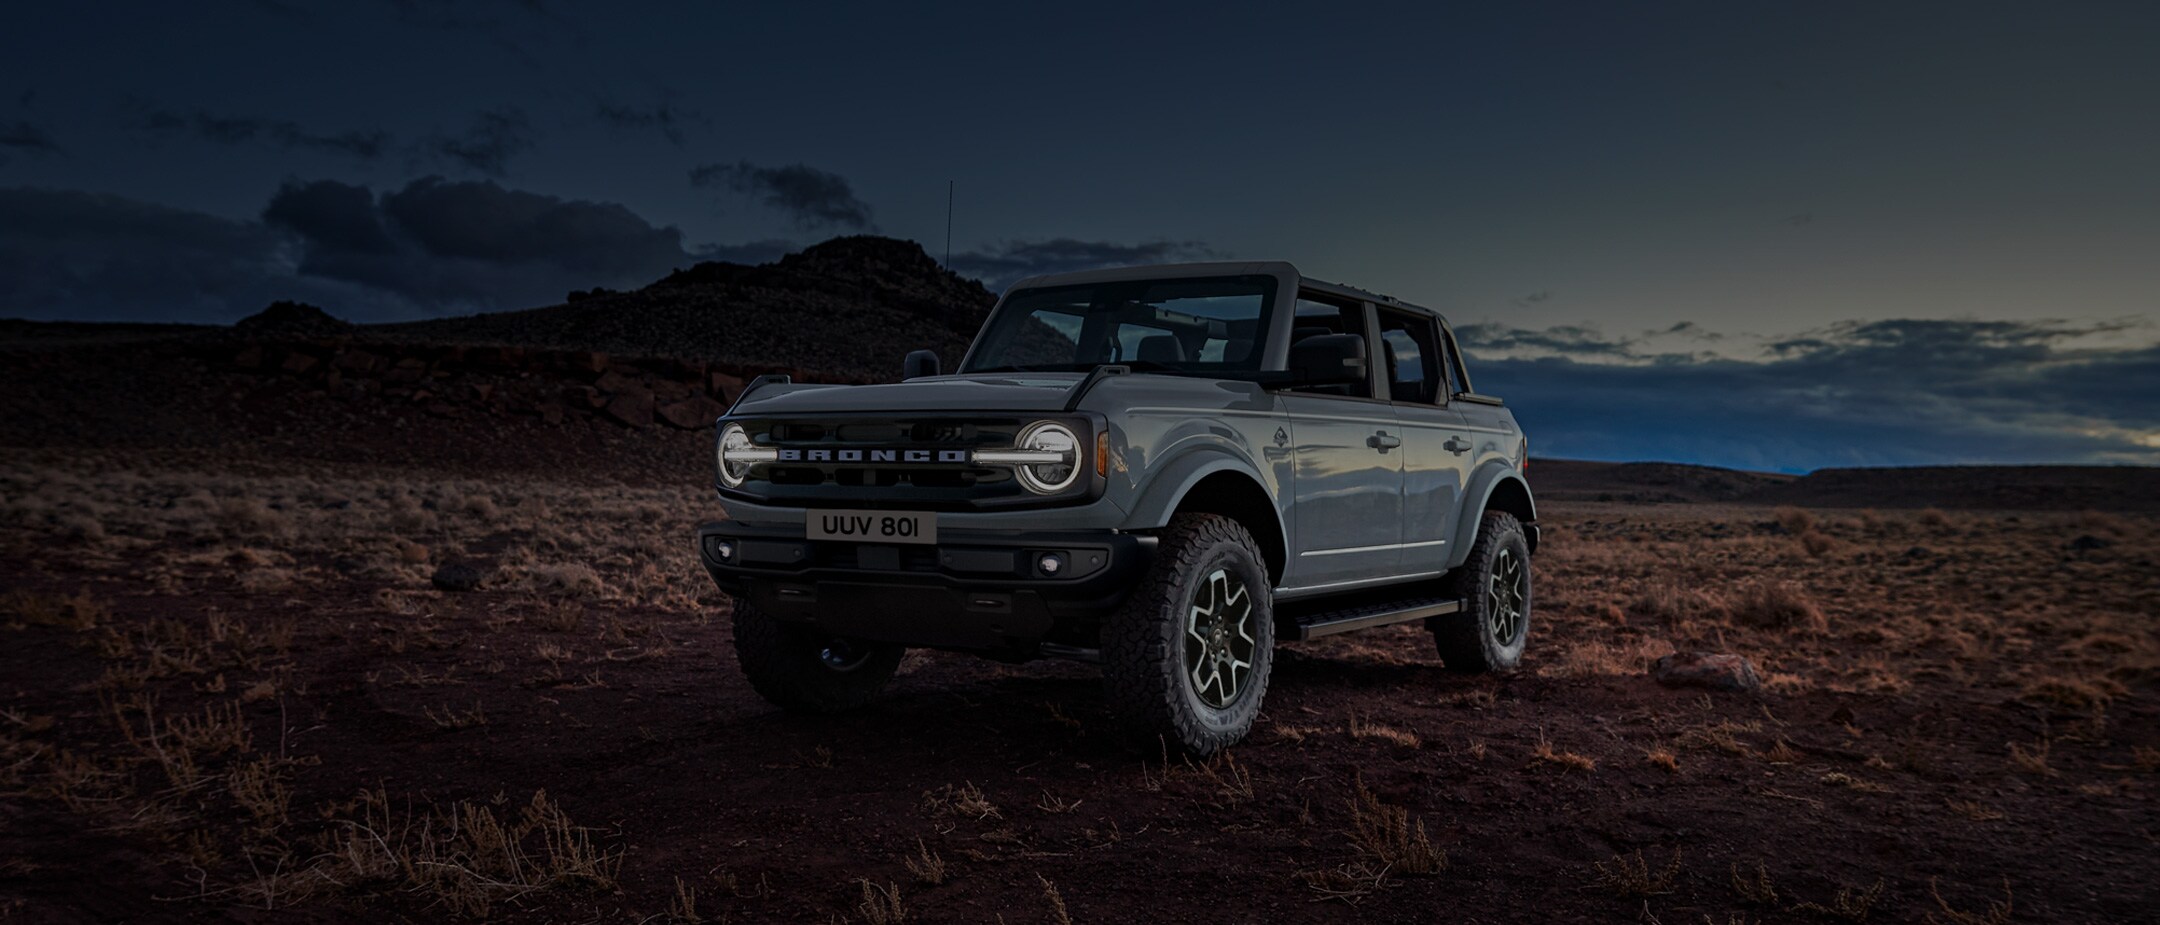 Ford Bronco exterior at night in desert